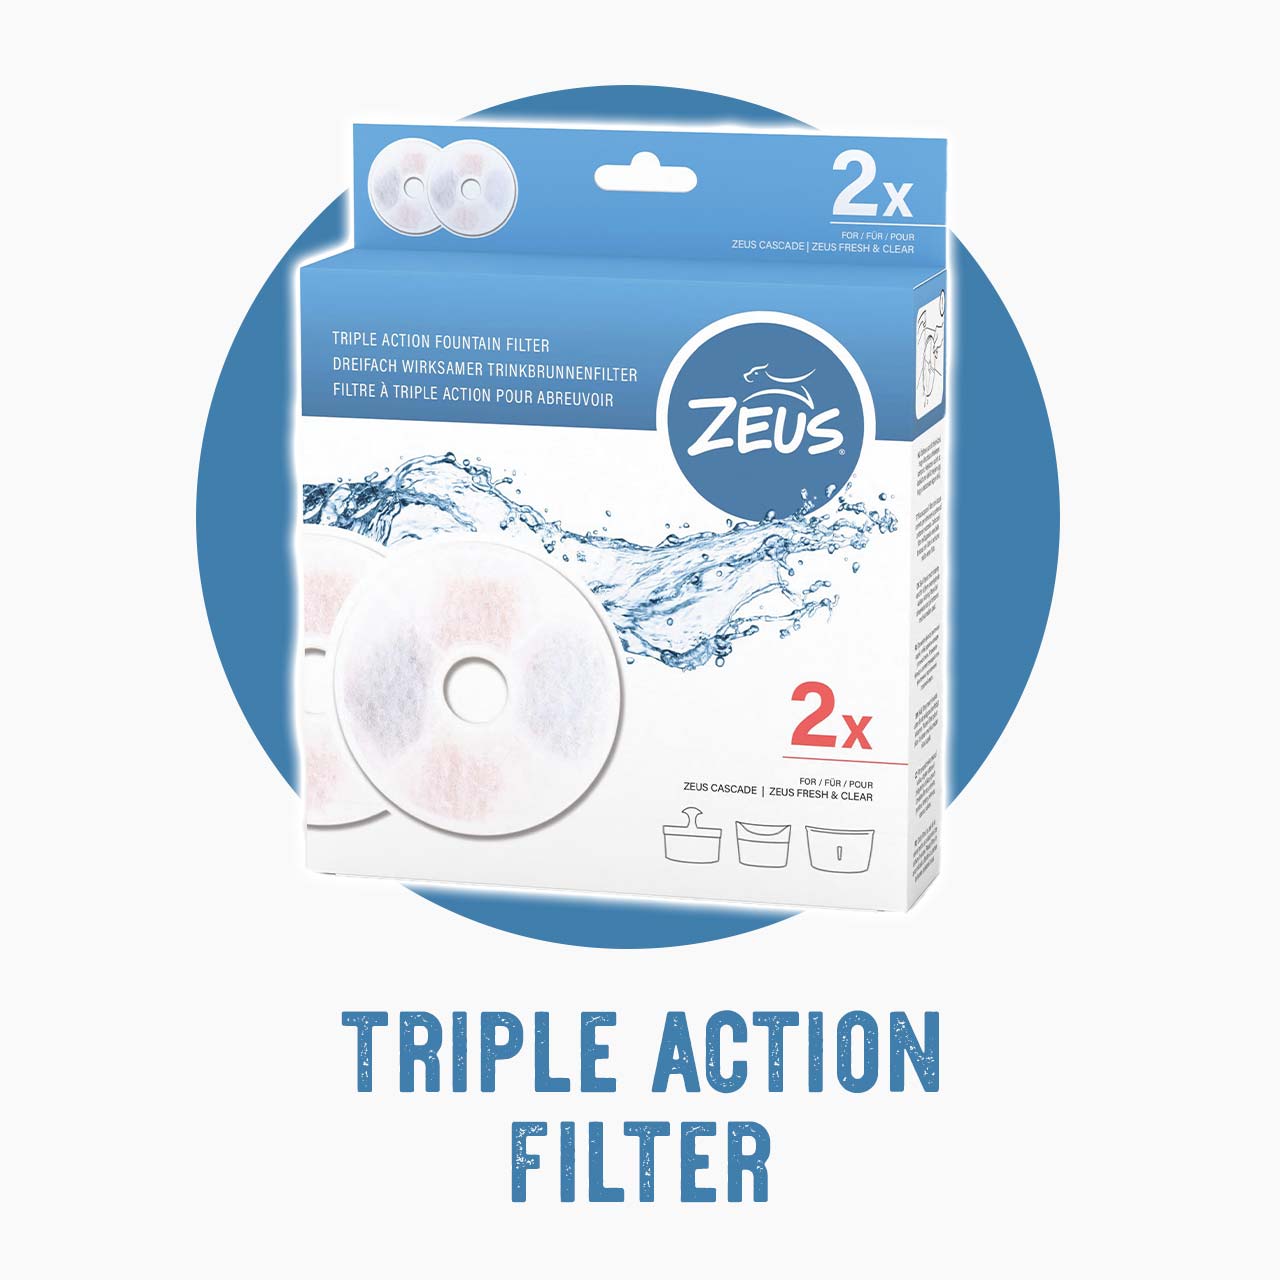 Triple action filter